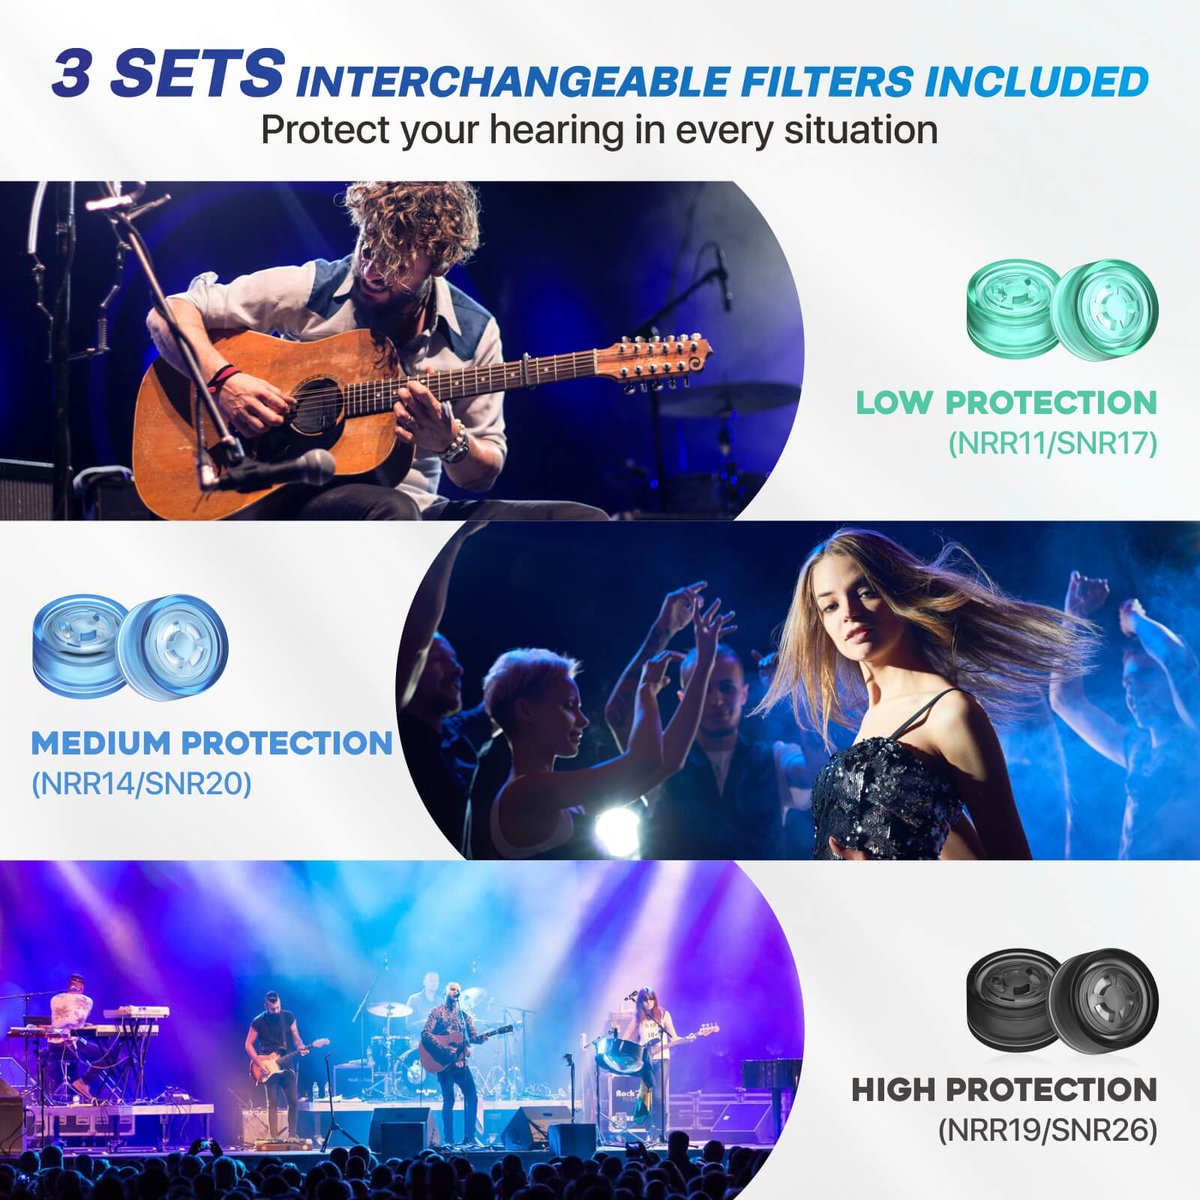 🎶 Musicians 21c Hearprotek: Ultimate ear plugs for concerts, sleep & swim! 🛌🎵🏊‍♂️ Comfort fit, clear sound, discreet. 🎧 Includes case + warranty. Protect your ears in style! #Hearprotek #EarPlugs #MusicLovers #SoundSafety 🛡️👂✨